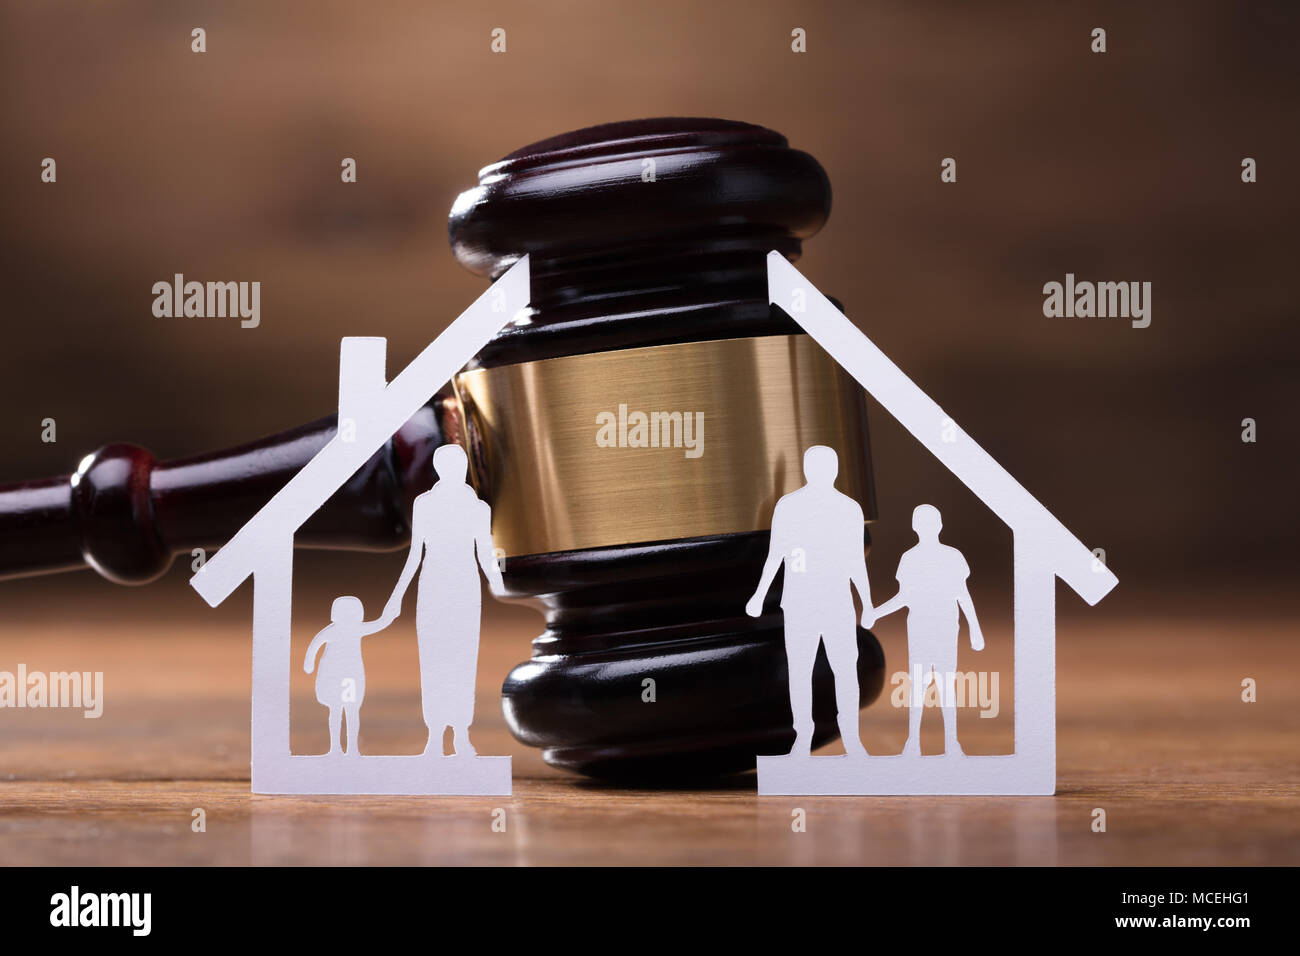 White Family Paper Cut Out In Front Of Judge Gavel On The Wooden Desk Stock Photo